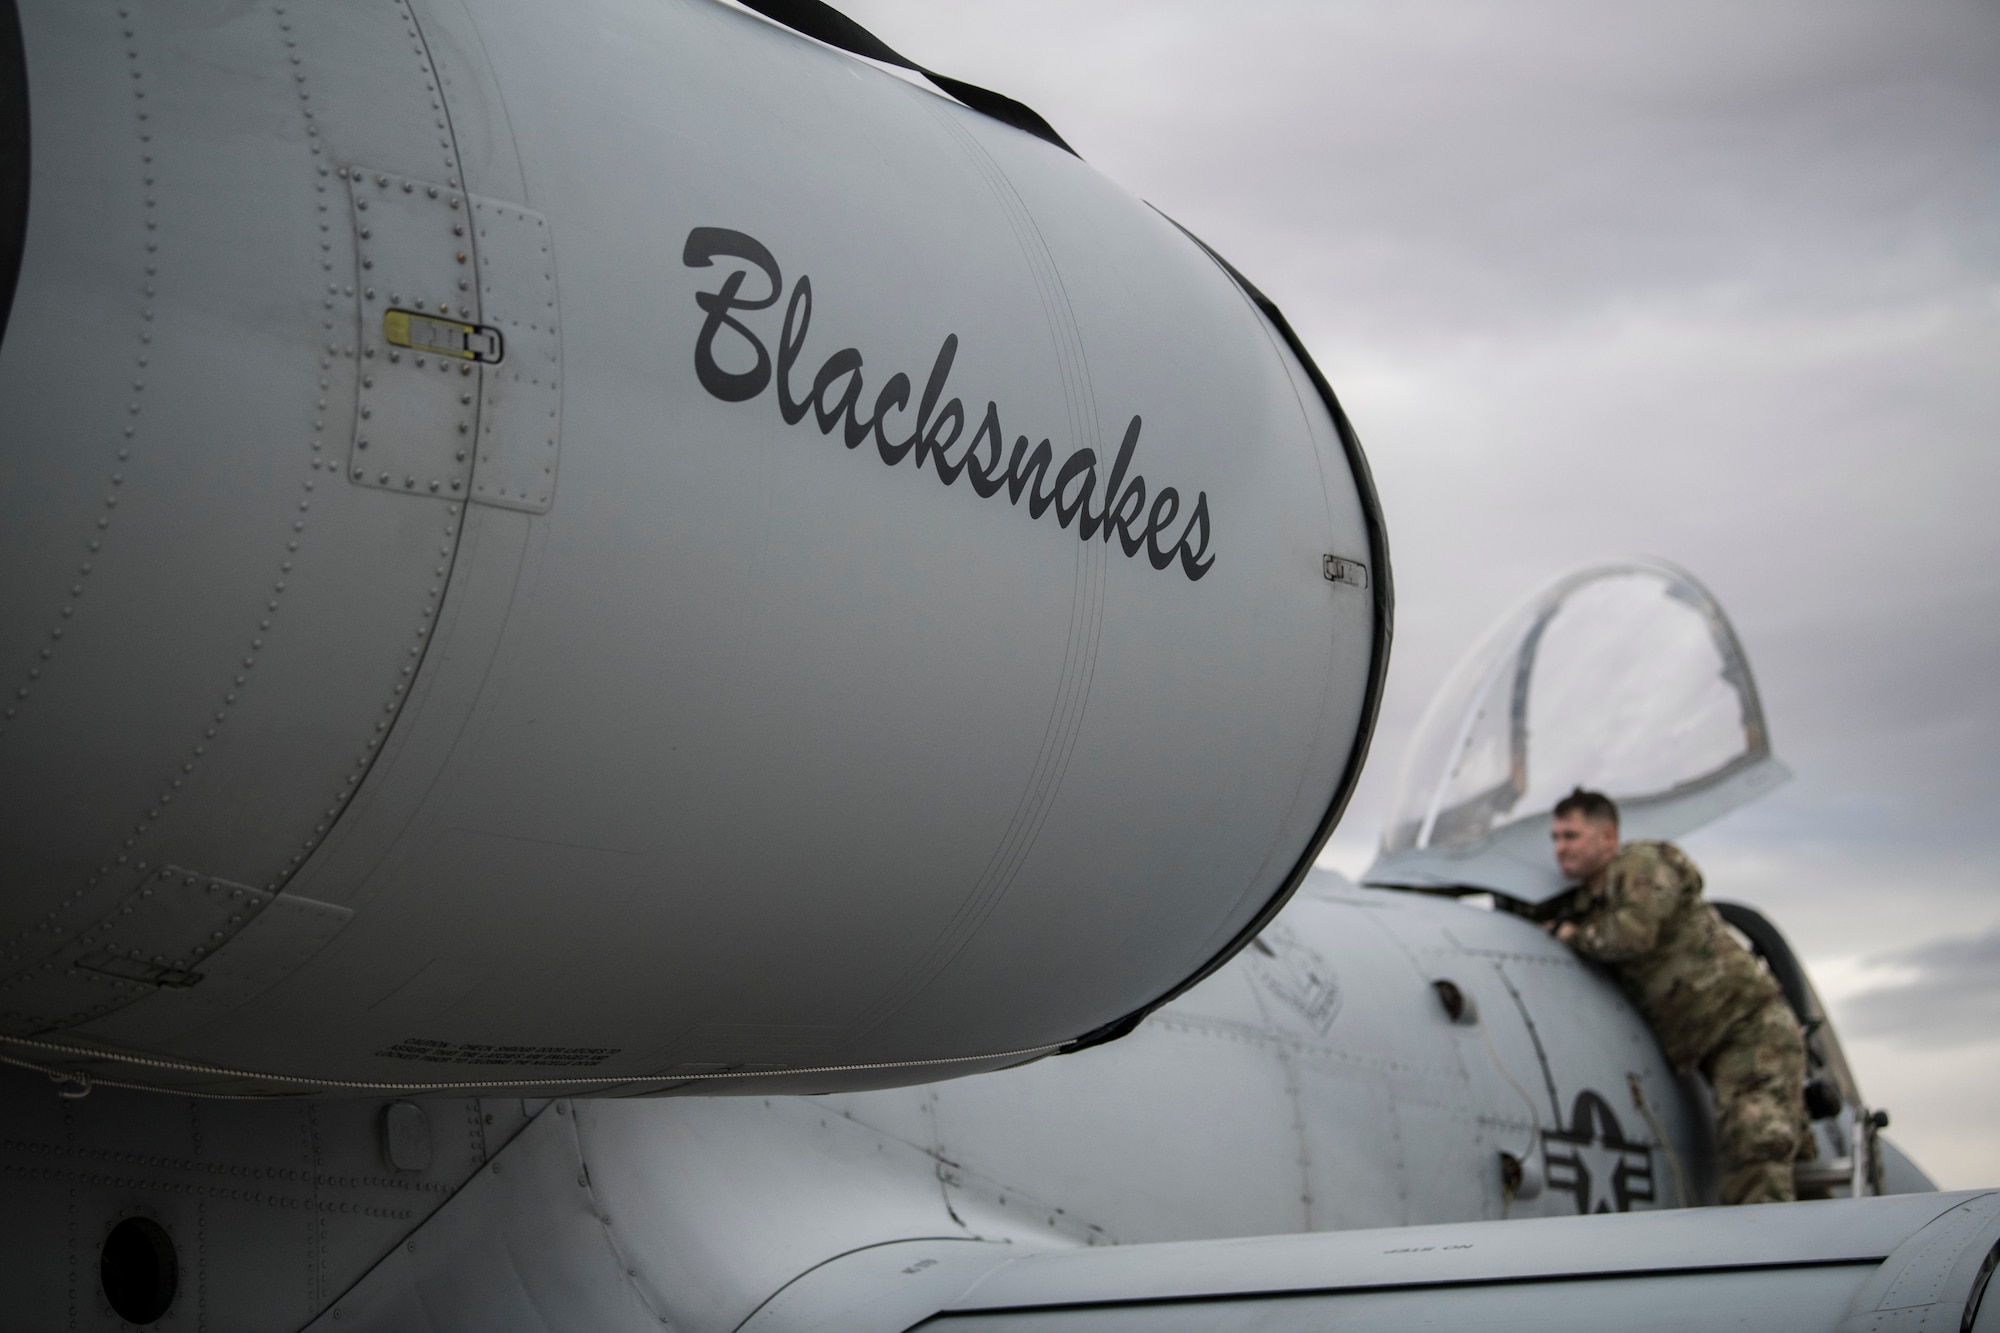 A U.S. Airman with the Indiana Air National Guard, assigned to the 122nd Fighter Wing, Fort Wayne, Indiana, works on an A-10C Thunderbolt II aircraft during Red Flag 21-1, at Nellis Air Force Base, Nevada, Jan. 19, 2021. The event, held several times per year, is a U.S. Air Force premier air-to-air combat training exercise. (U.S. Air National Guard photo by Staff Sgt. Justin Andras)